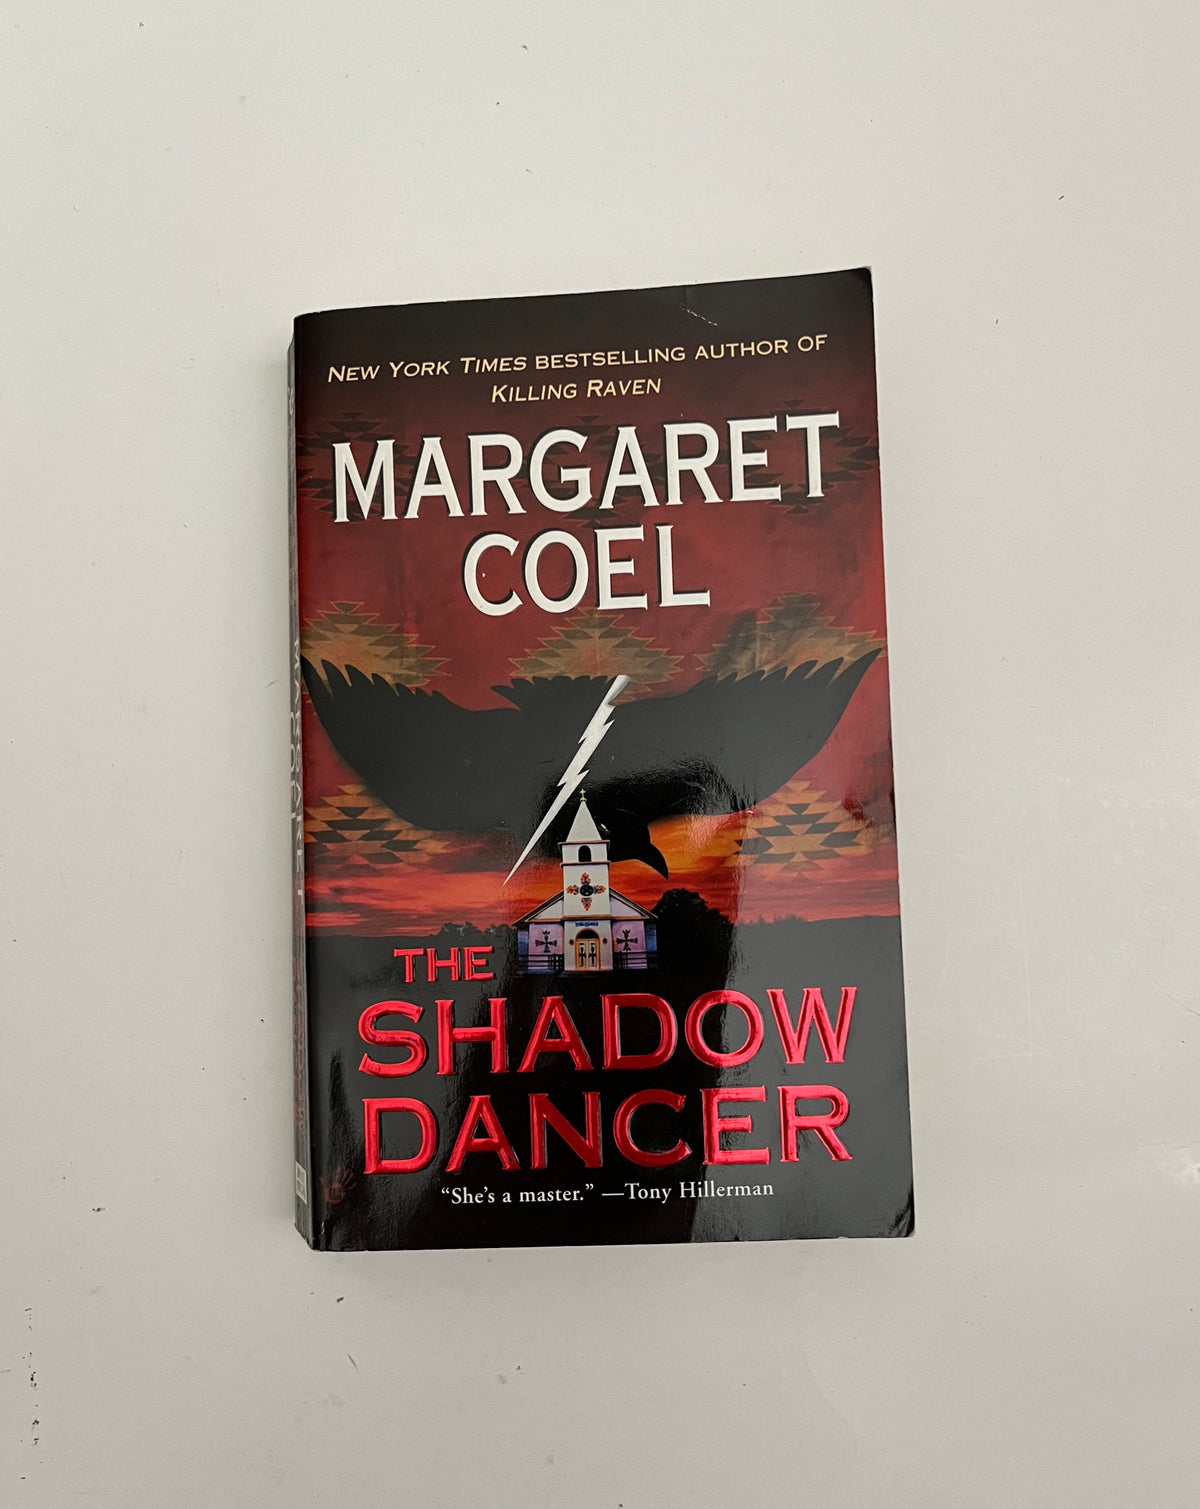 DONATE: The Shadow Dancer by Margaret Coel